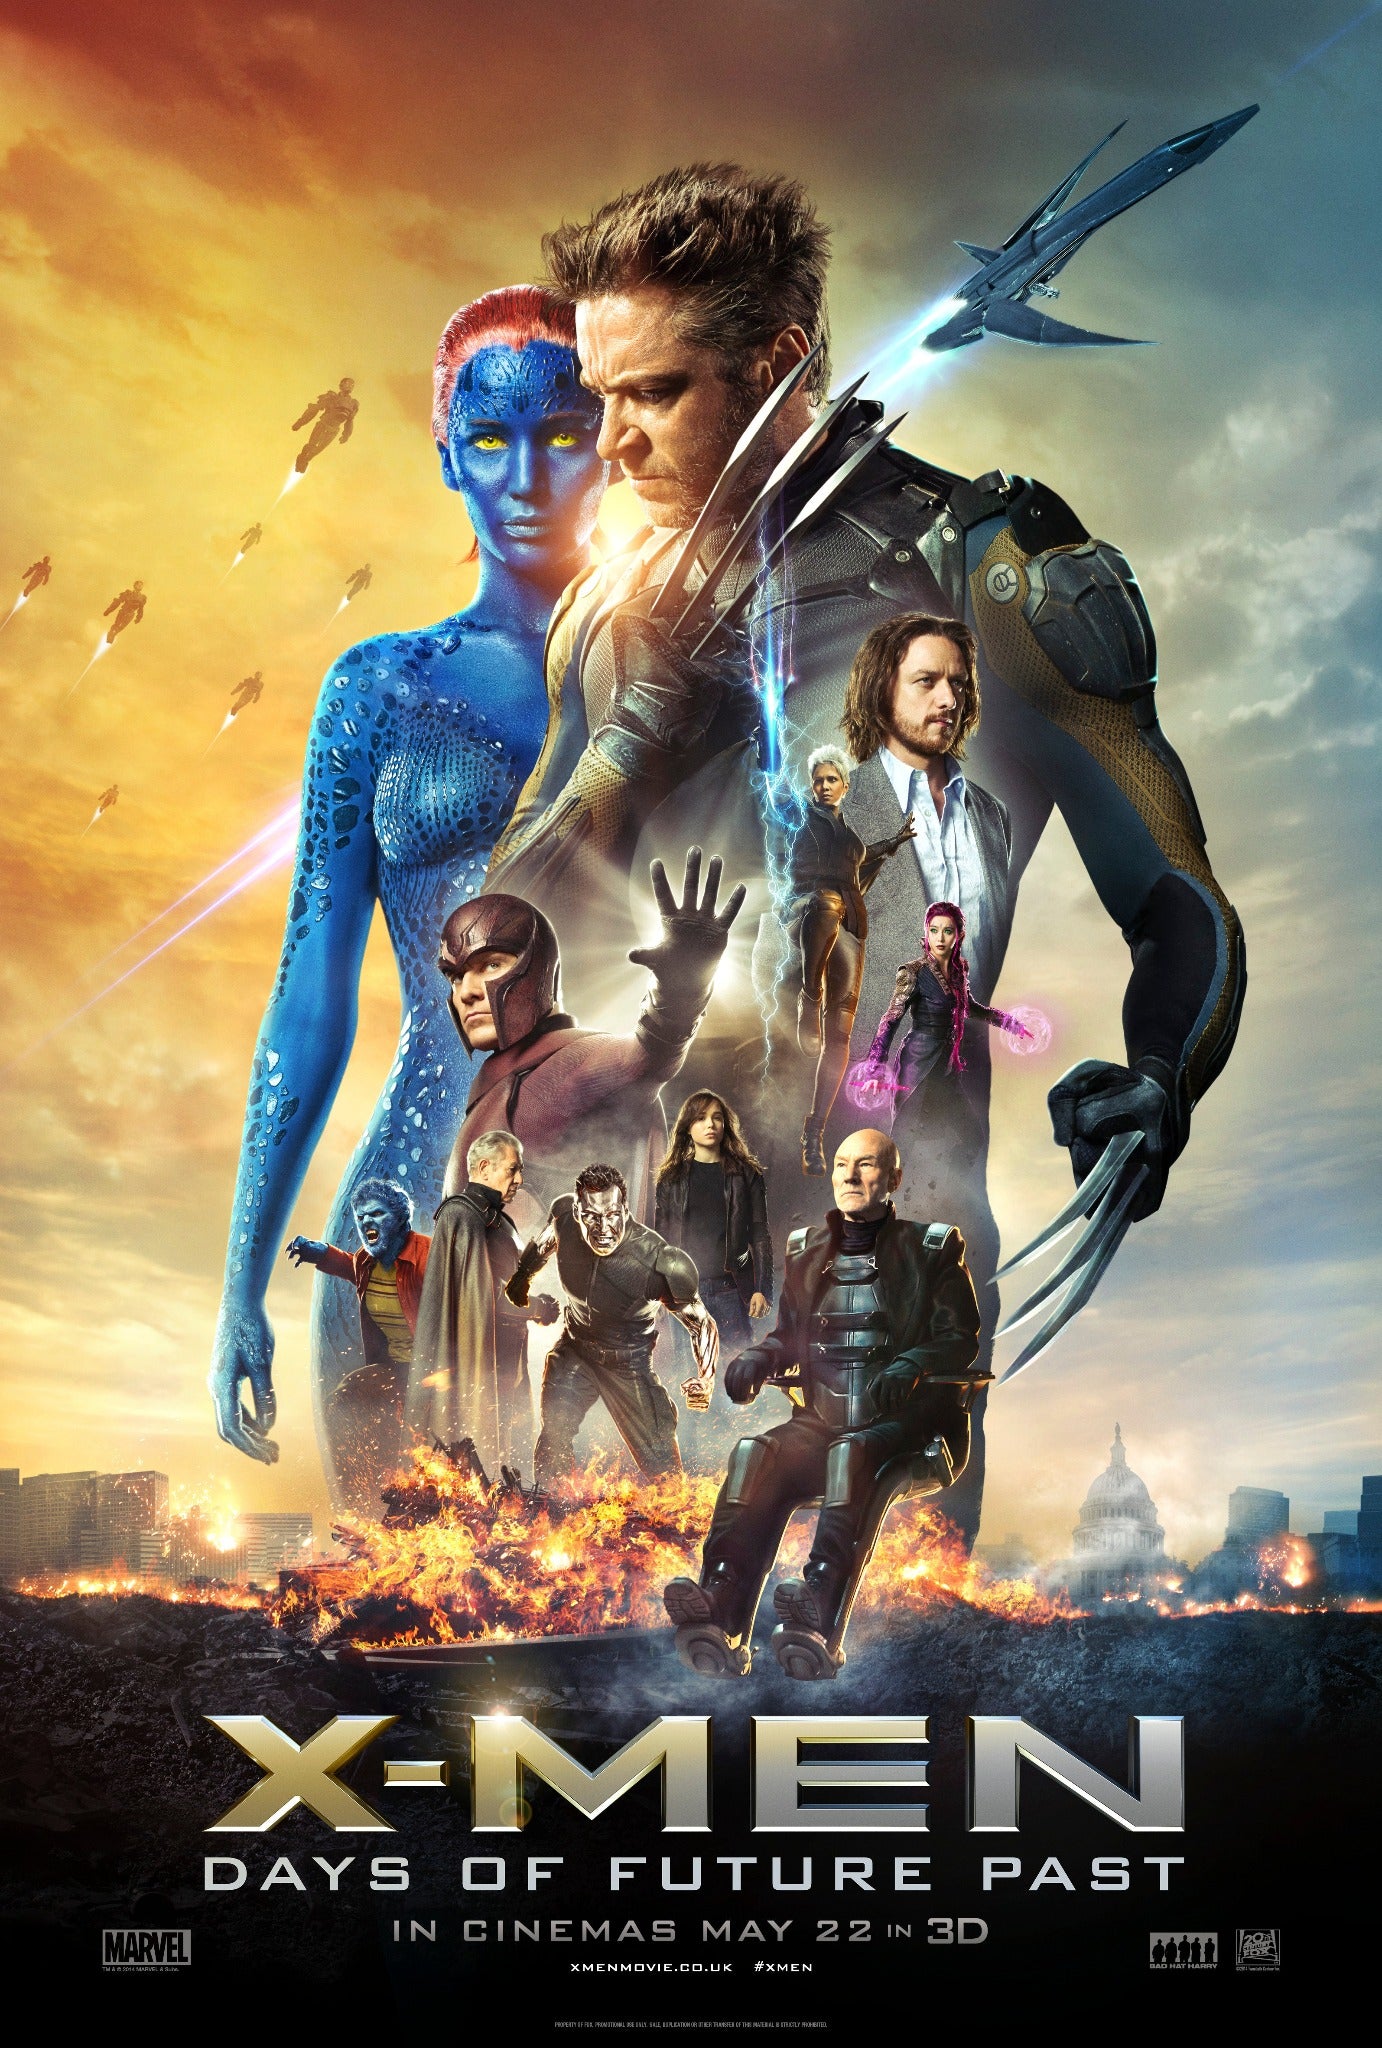 X-Men: Days of Future Past 2014 | Action/Sci-fi |  2h 31m | MP4